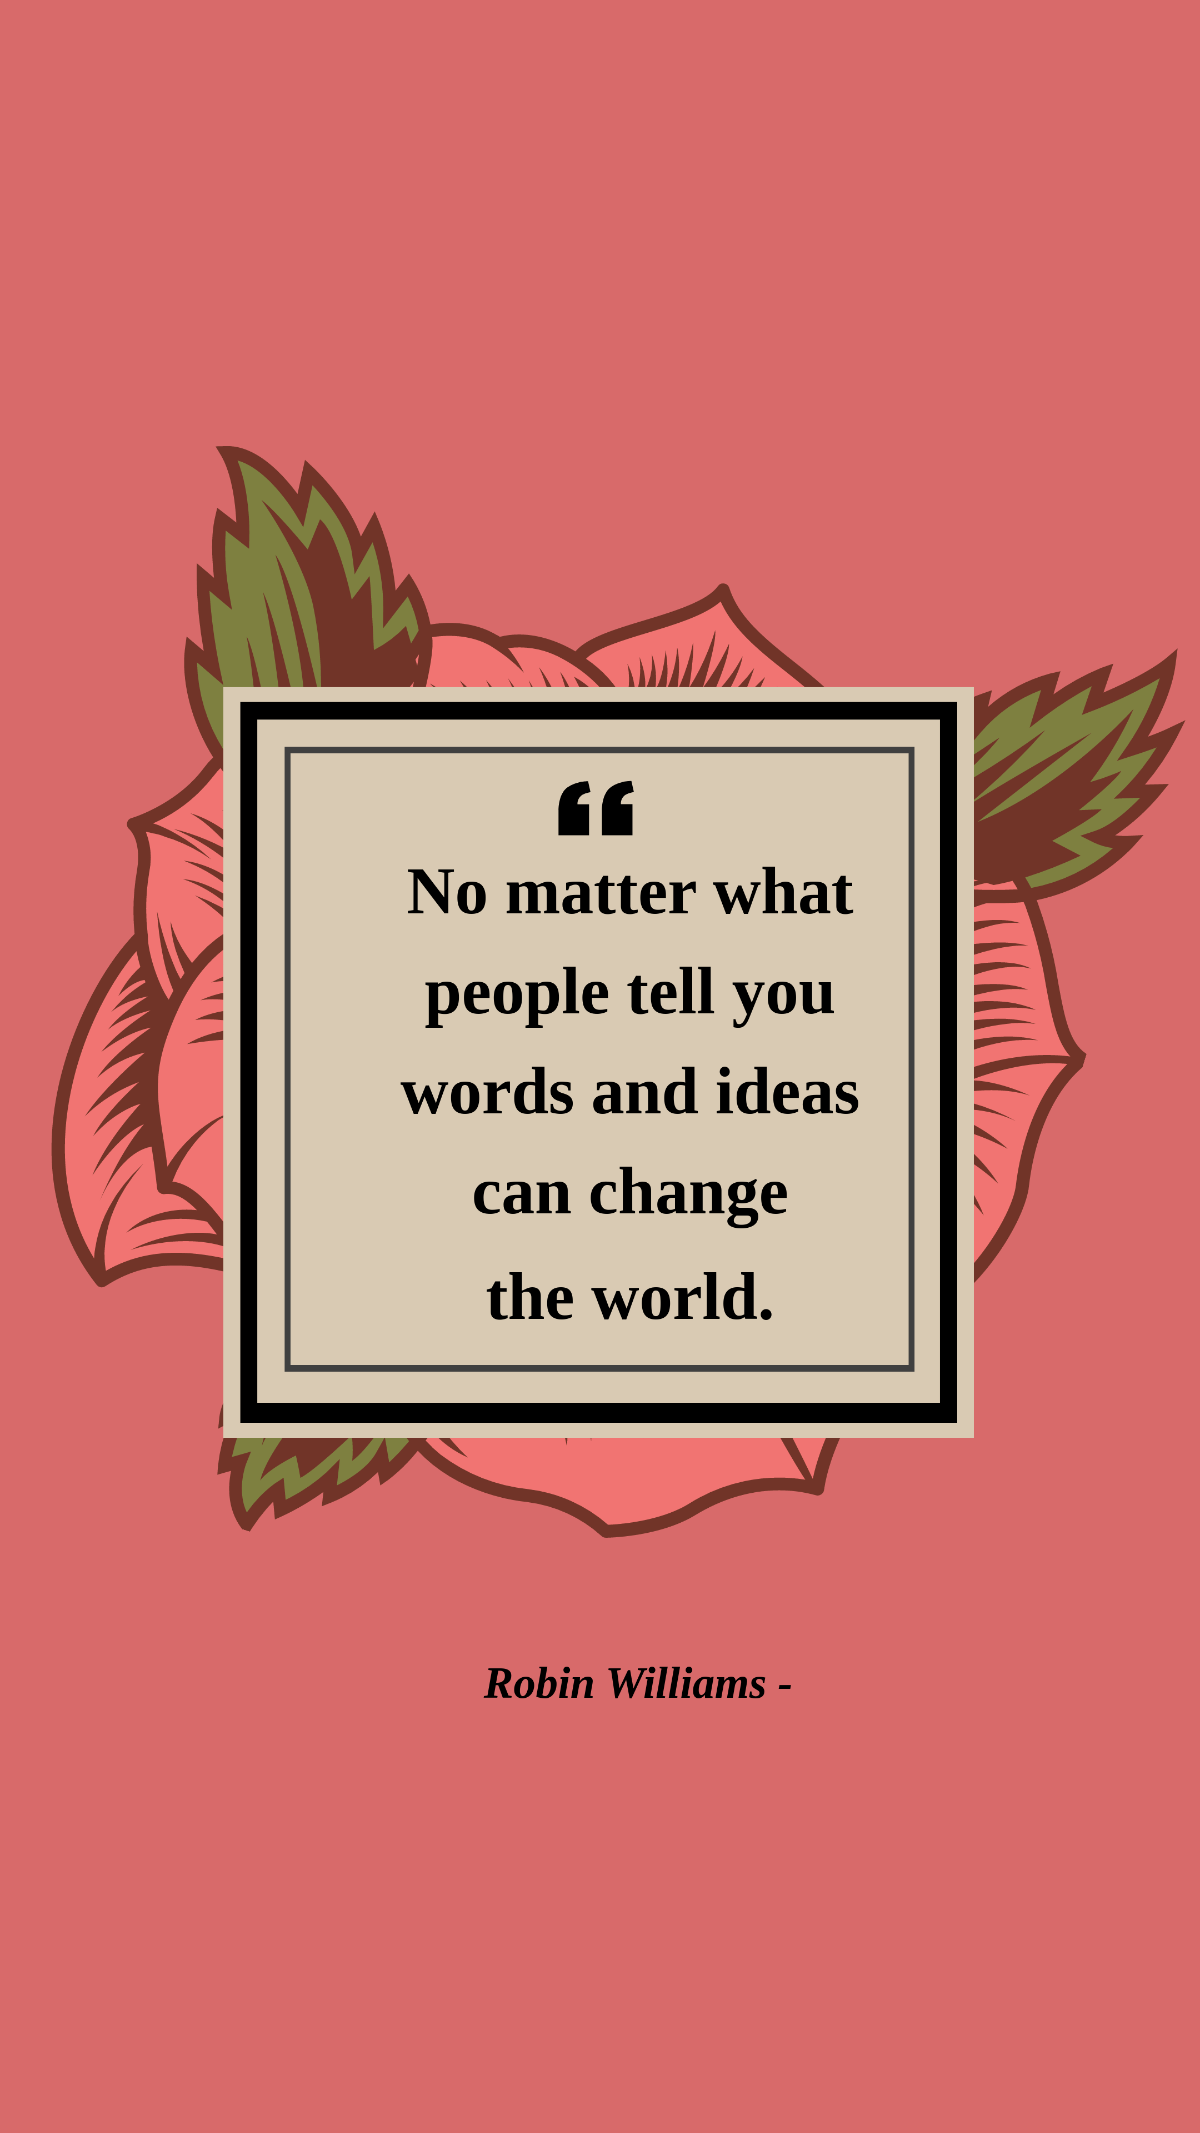 Robin Williams - No matter what people tell you words and ideas can change the world. Template